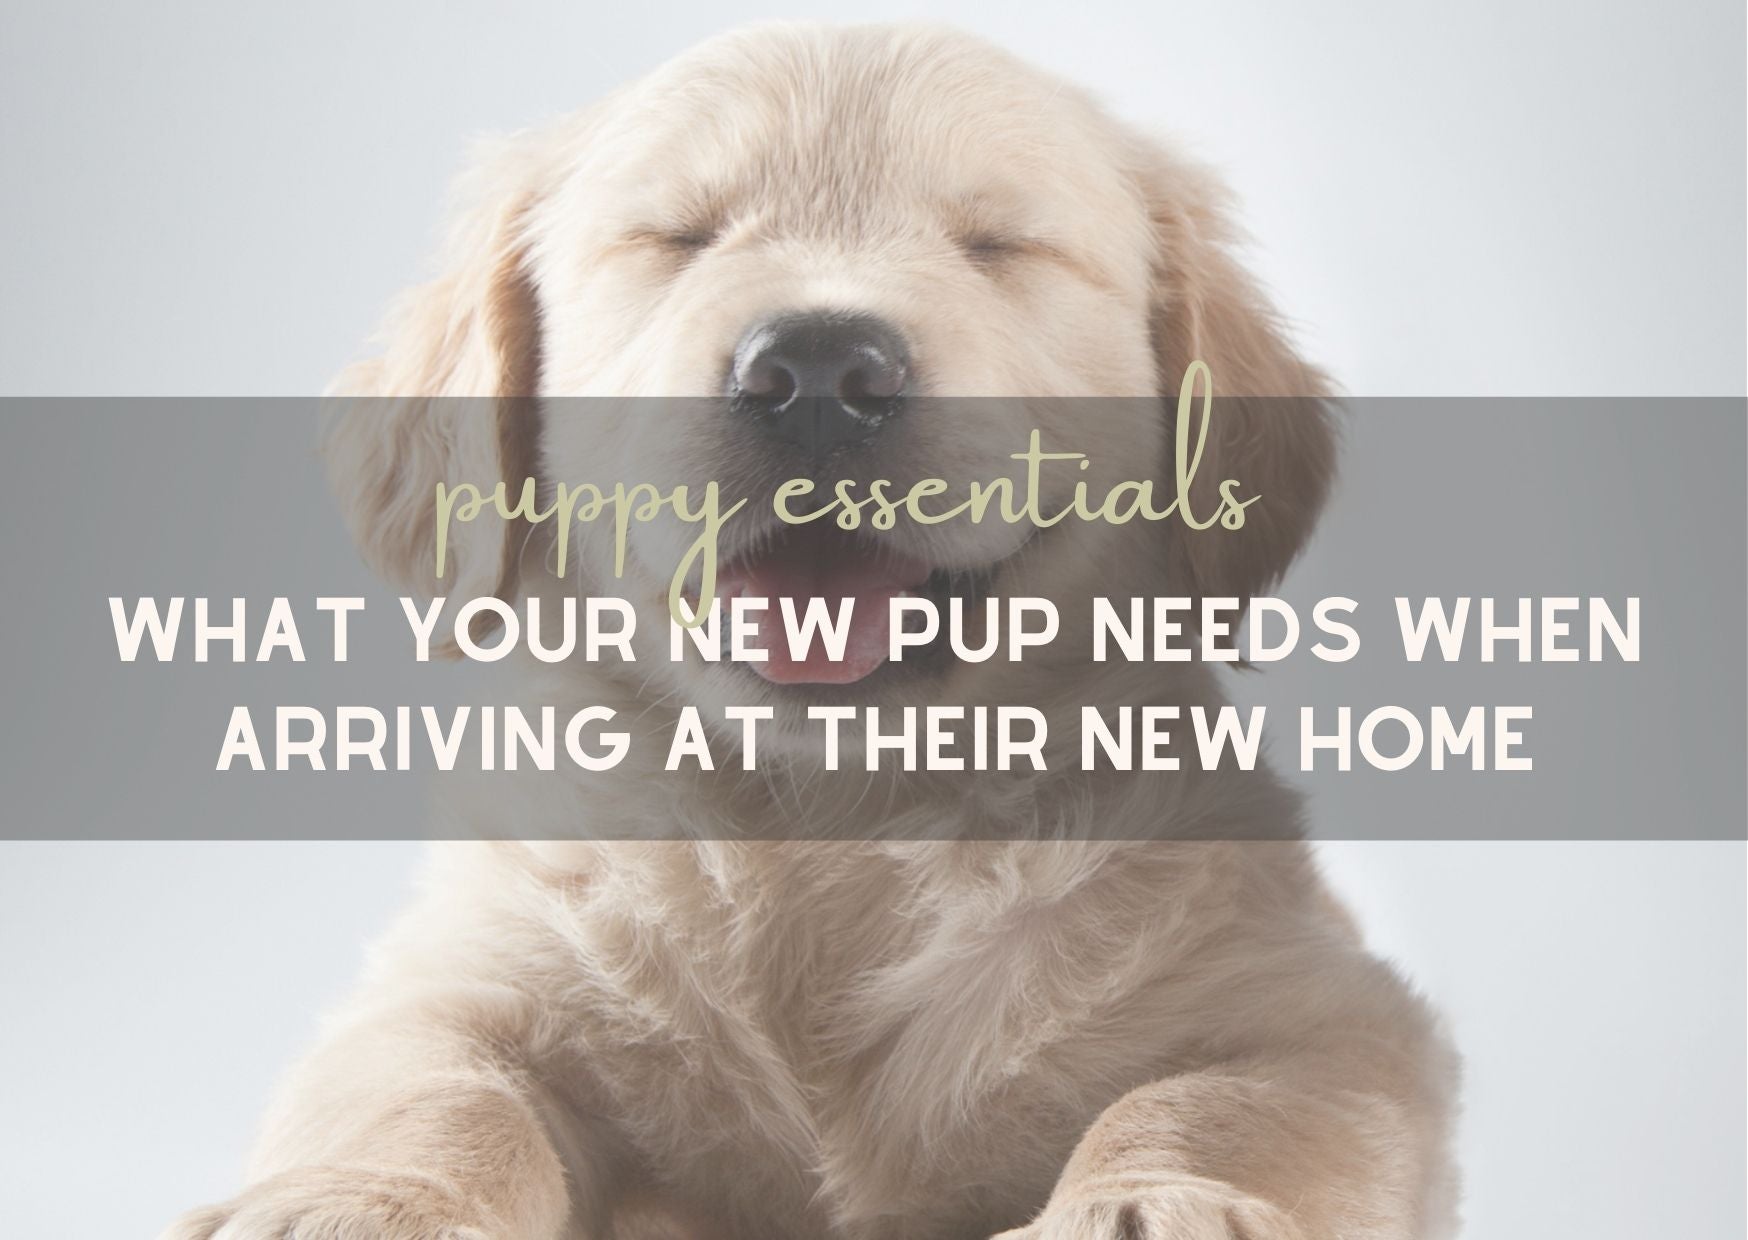 Puppy Essentials - What your new pup needs when arriving at their new home